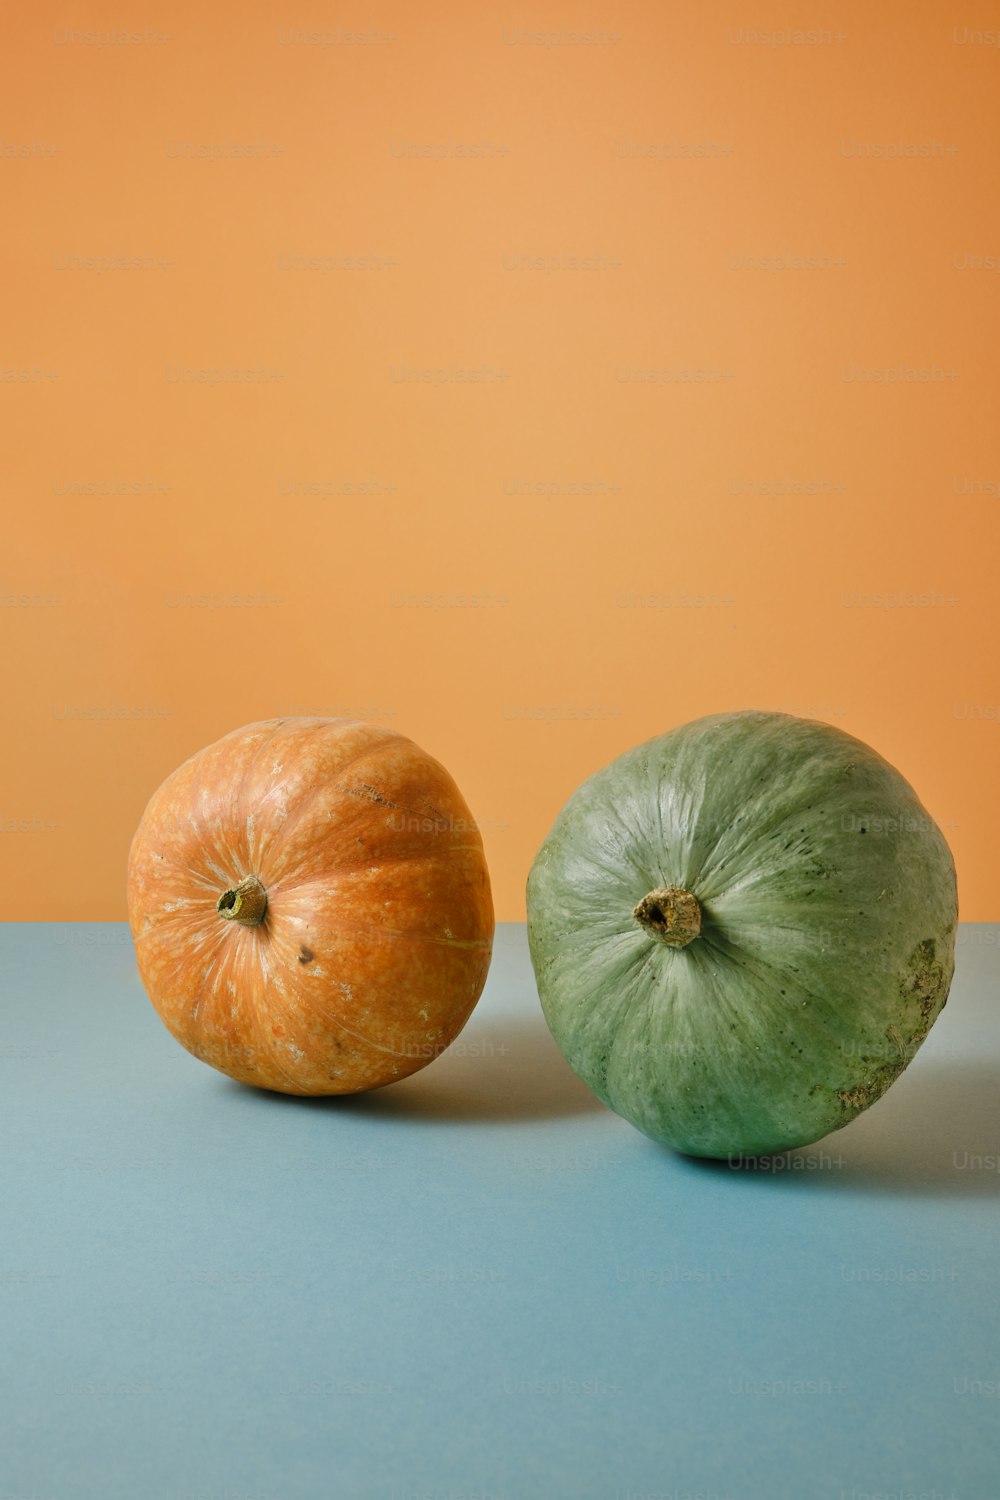 two oranges and a green apple on a blue surface